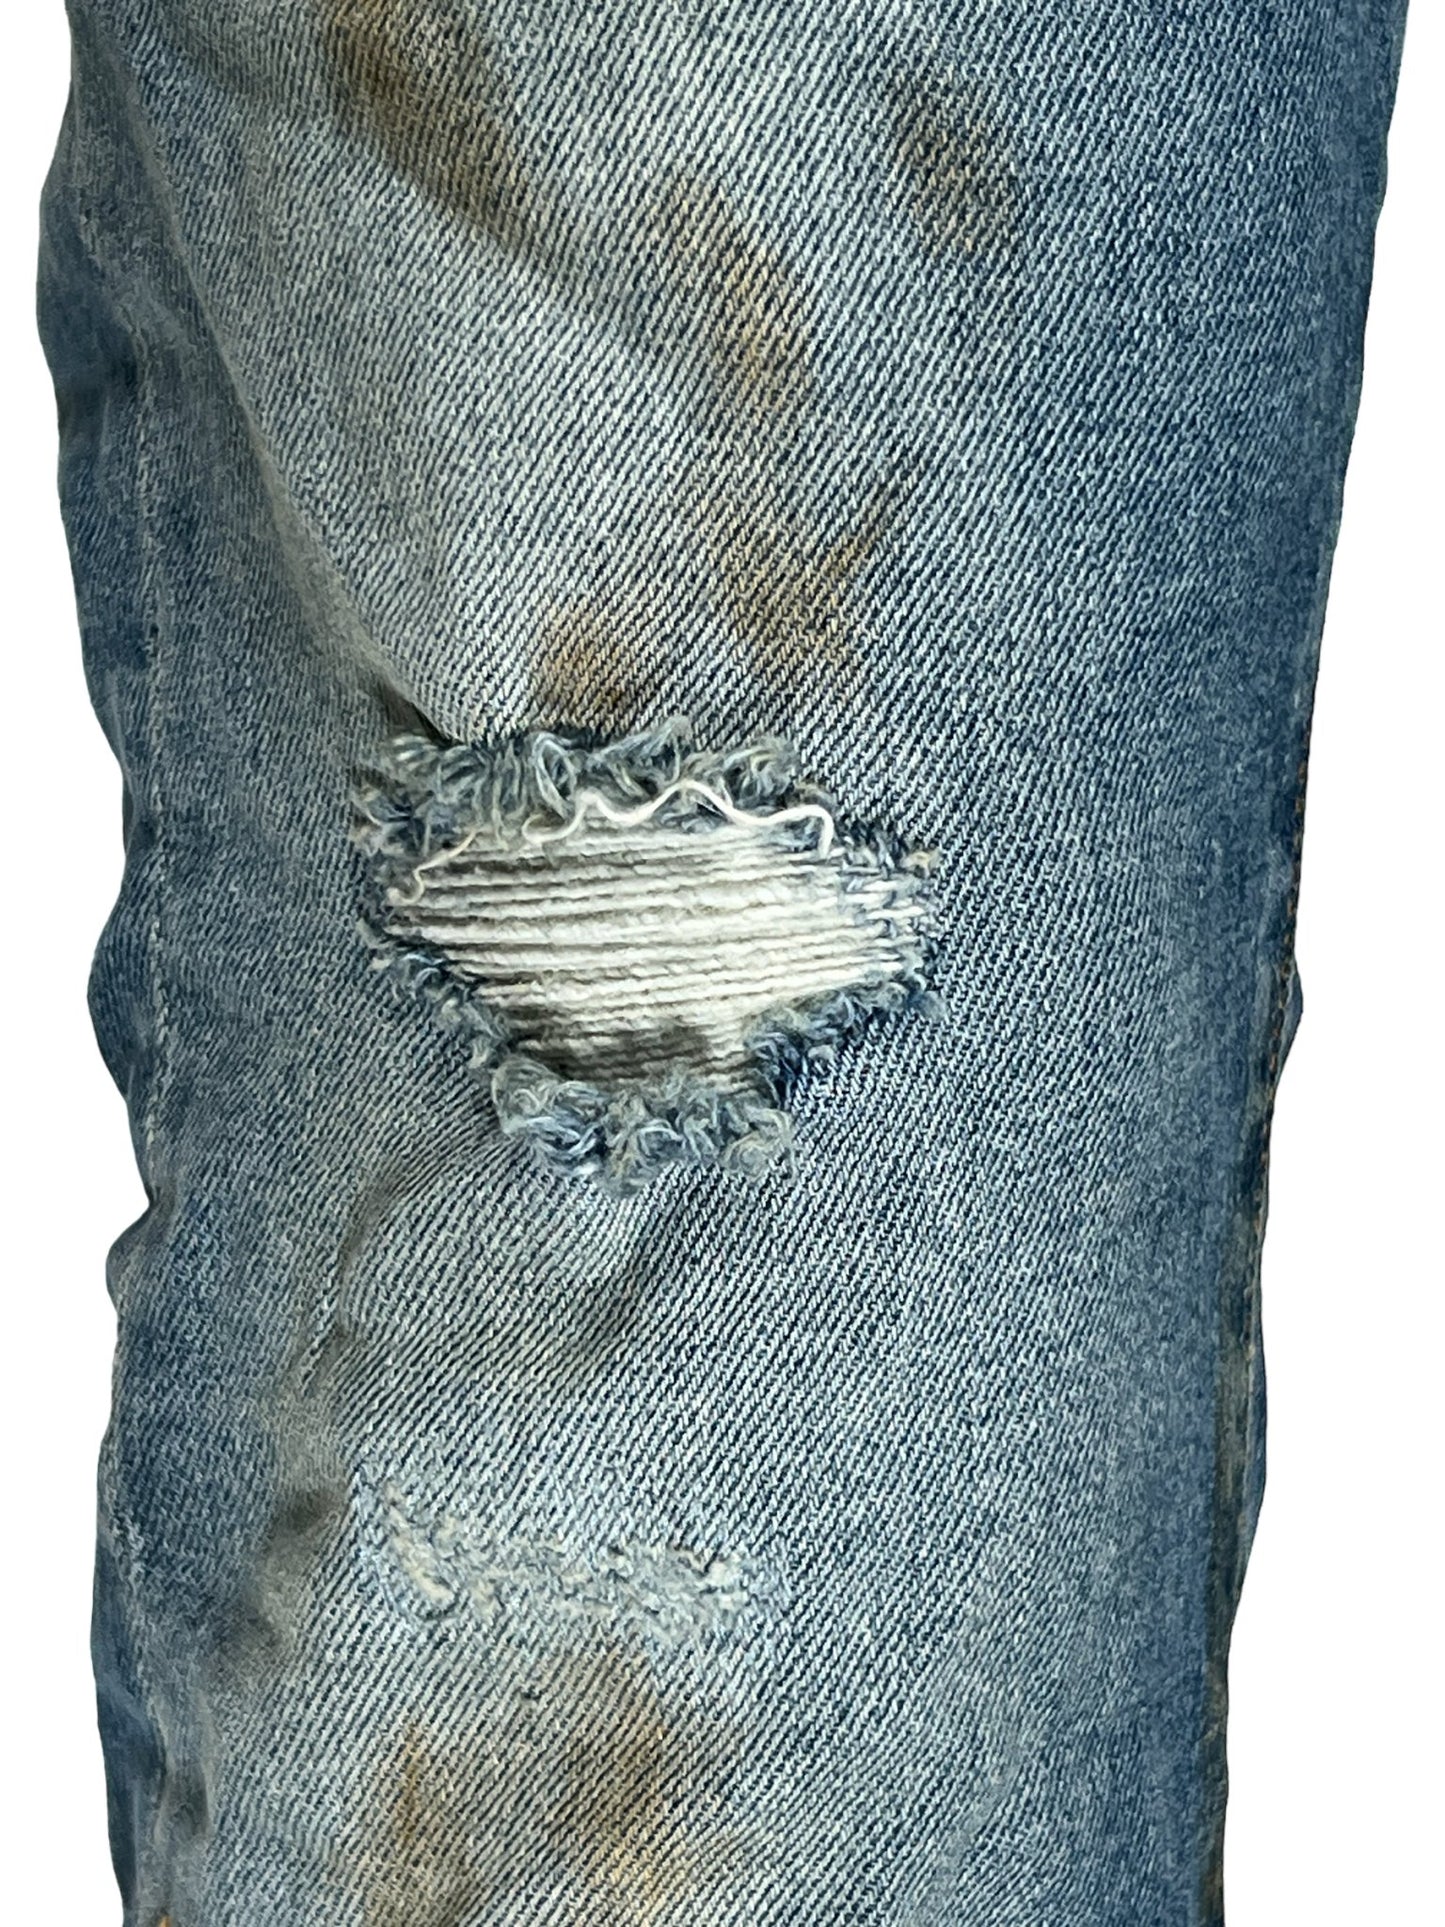 A close up of a pair of PURPLE BRAND JEANS P001-FLIP FADED LIGHT INDIGO PAINTER with holes in them from Purple Brand.